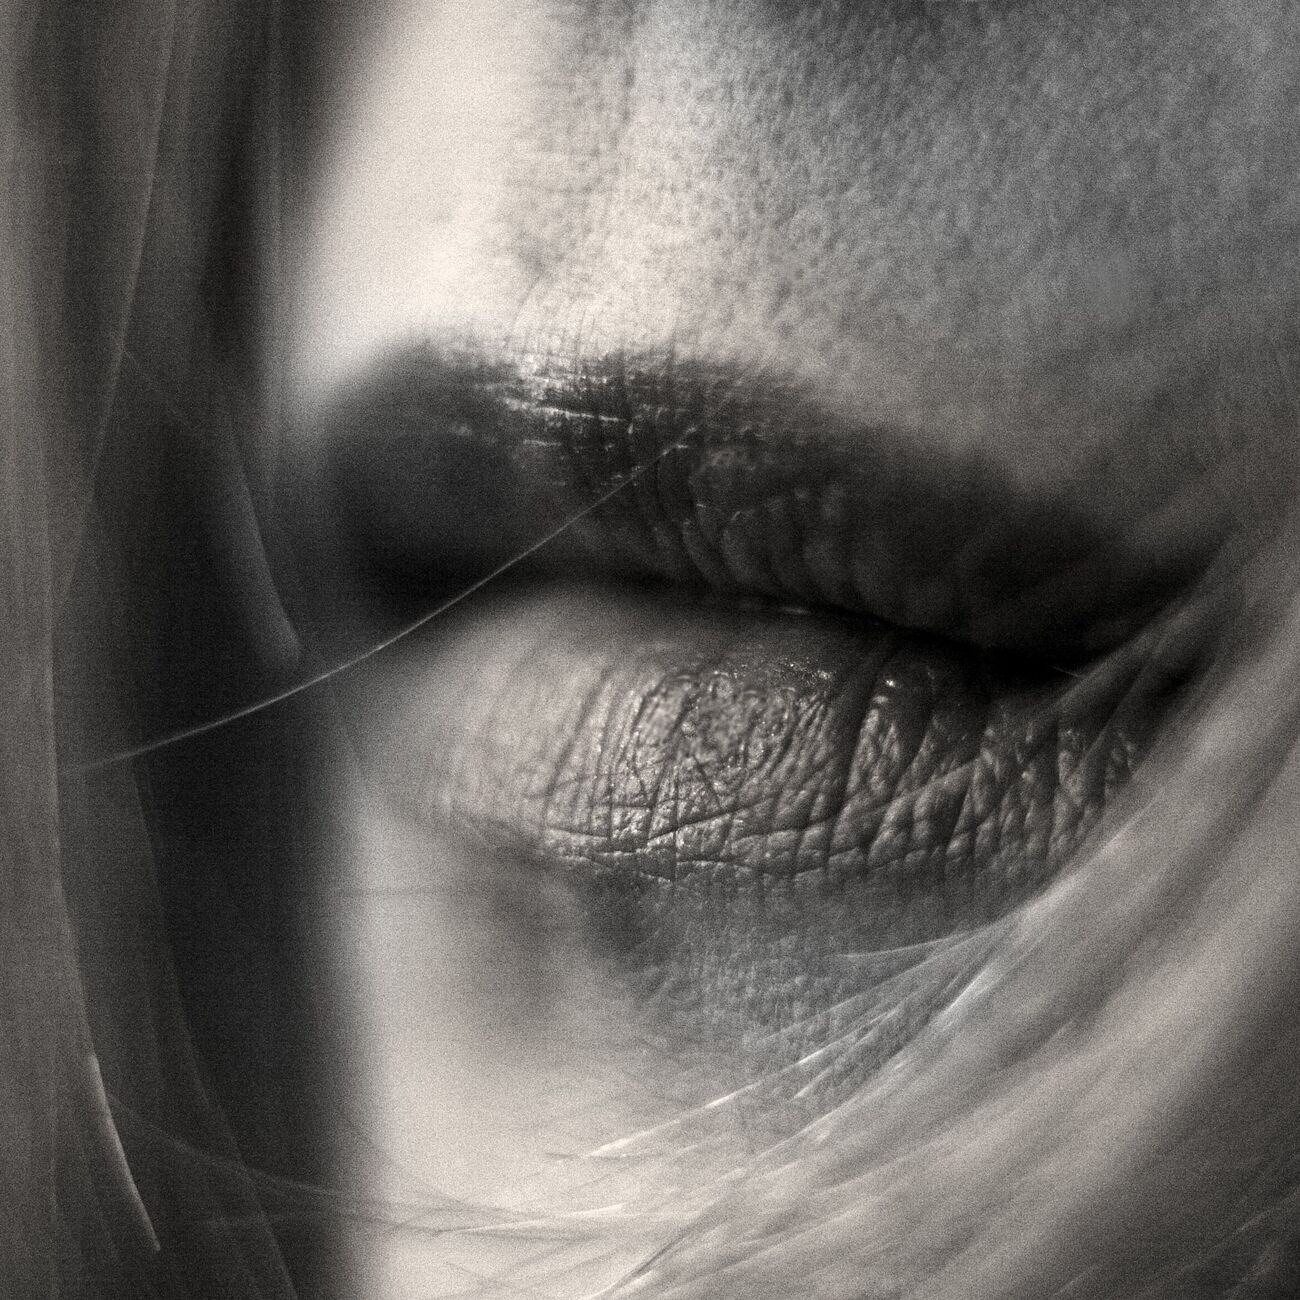 Photograph print 7.1 x 7.1 in, Sweet on her lips. Ref-580-23 - Denis Olivier Art Photography